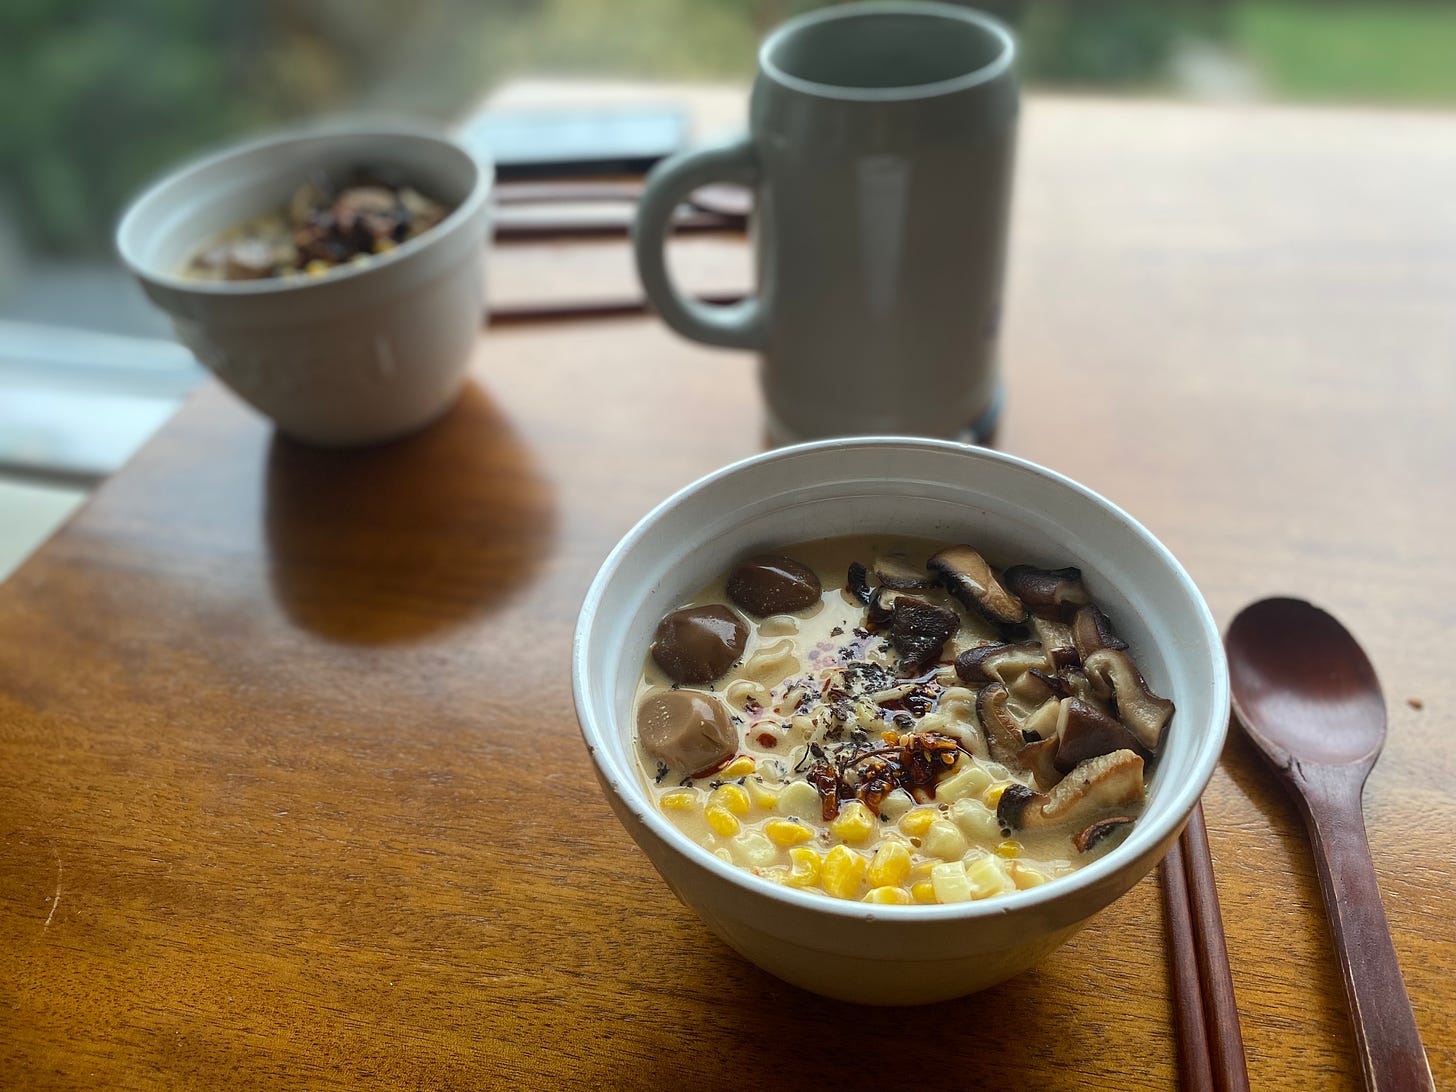 Two white bowls of ramen with the toppings described above: fried shiitakes, kernels of corn, and three marinated quail eggs, plus a drizzle of chili crisp. In the background is a large ceramic beer stein.